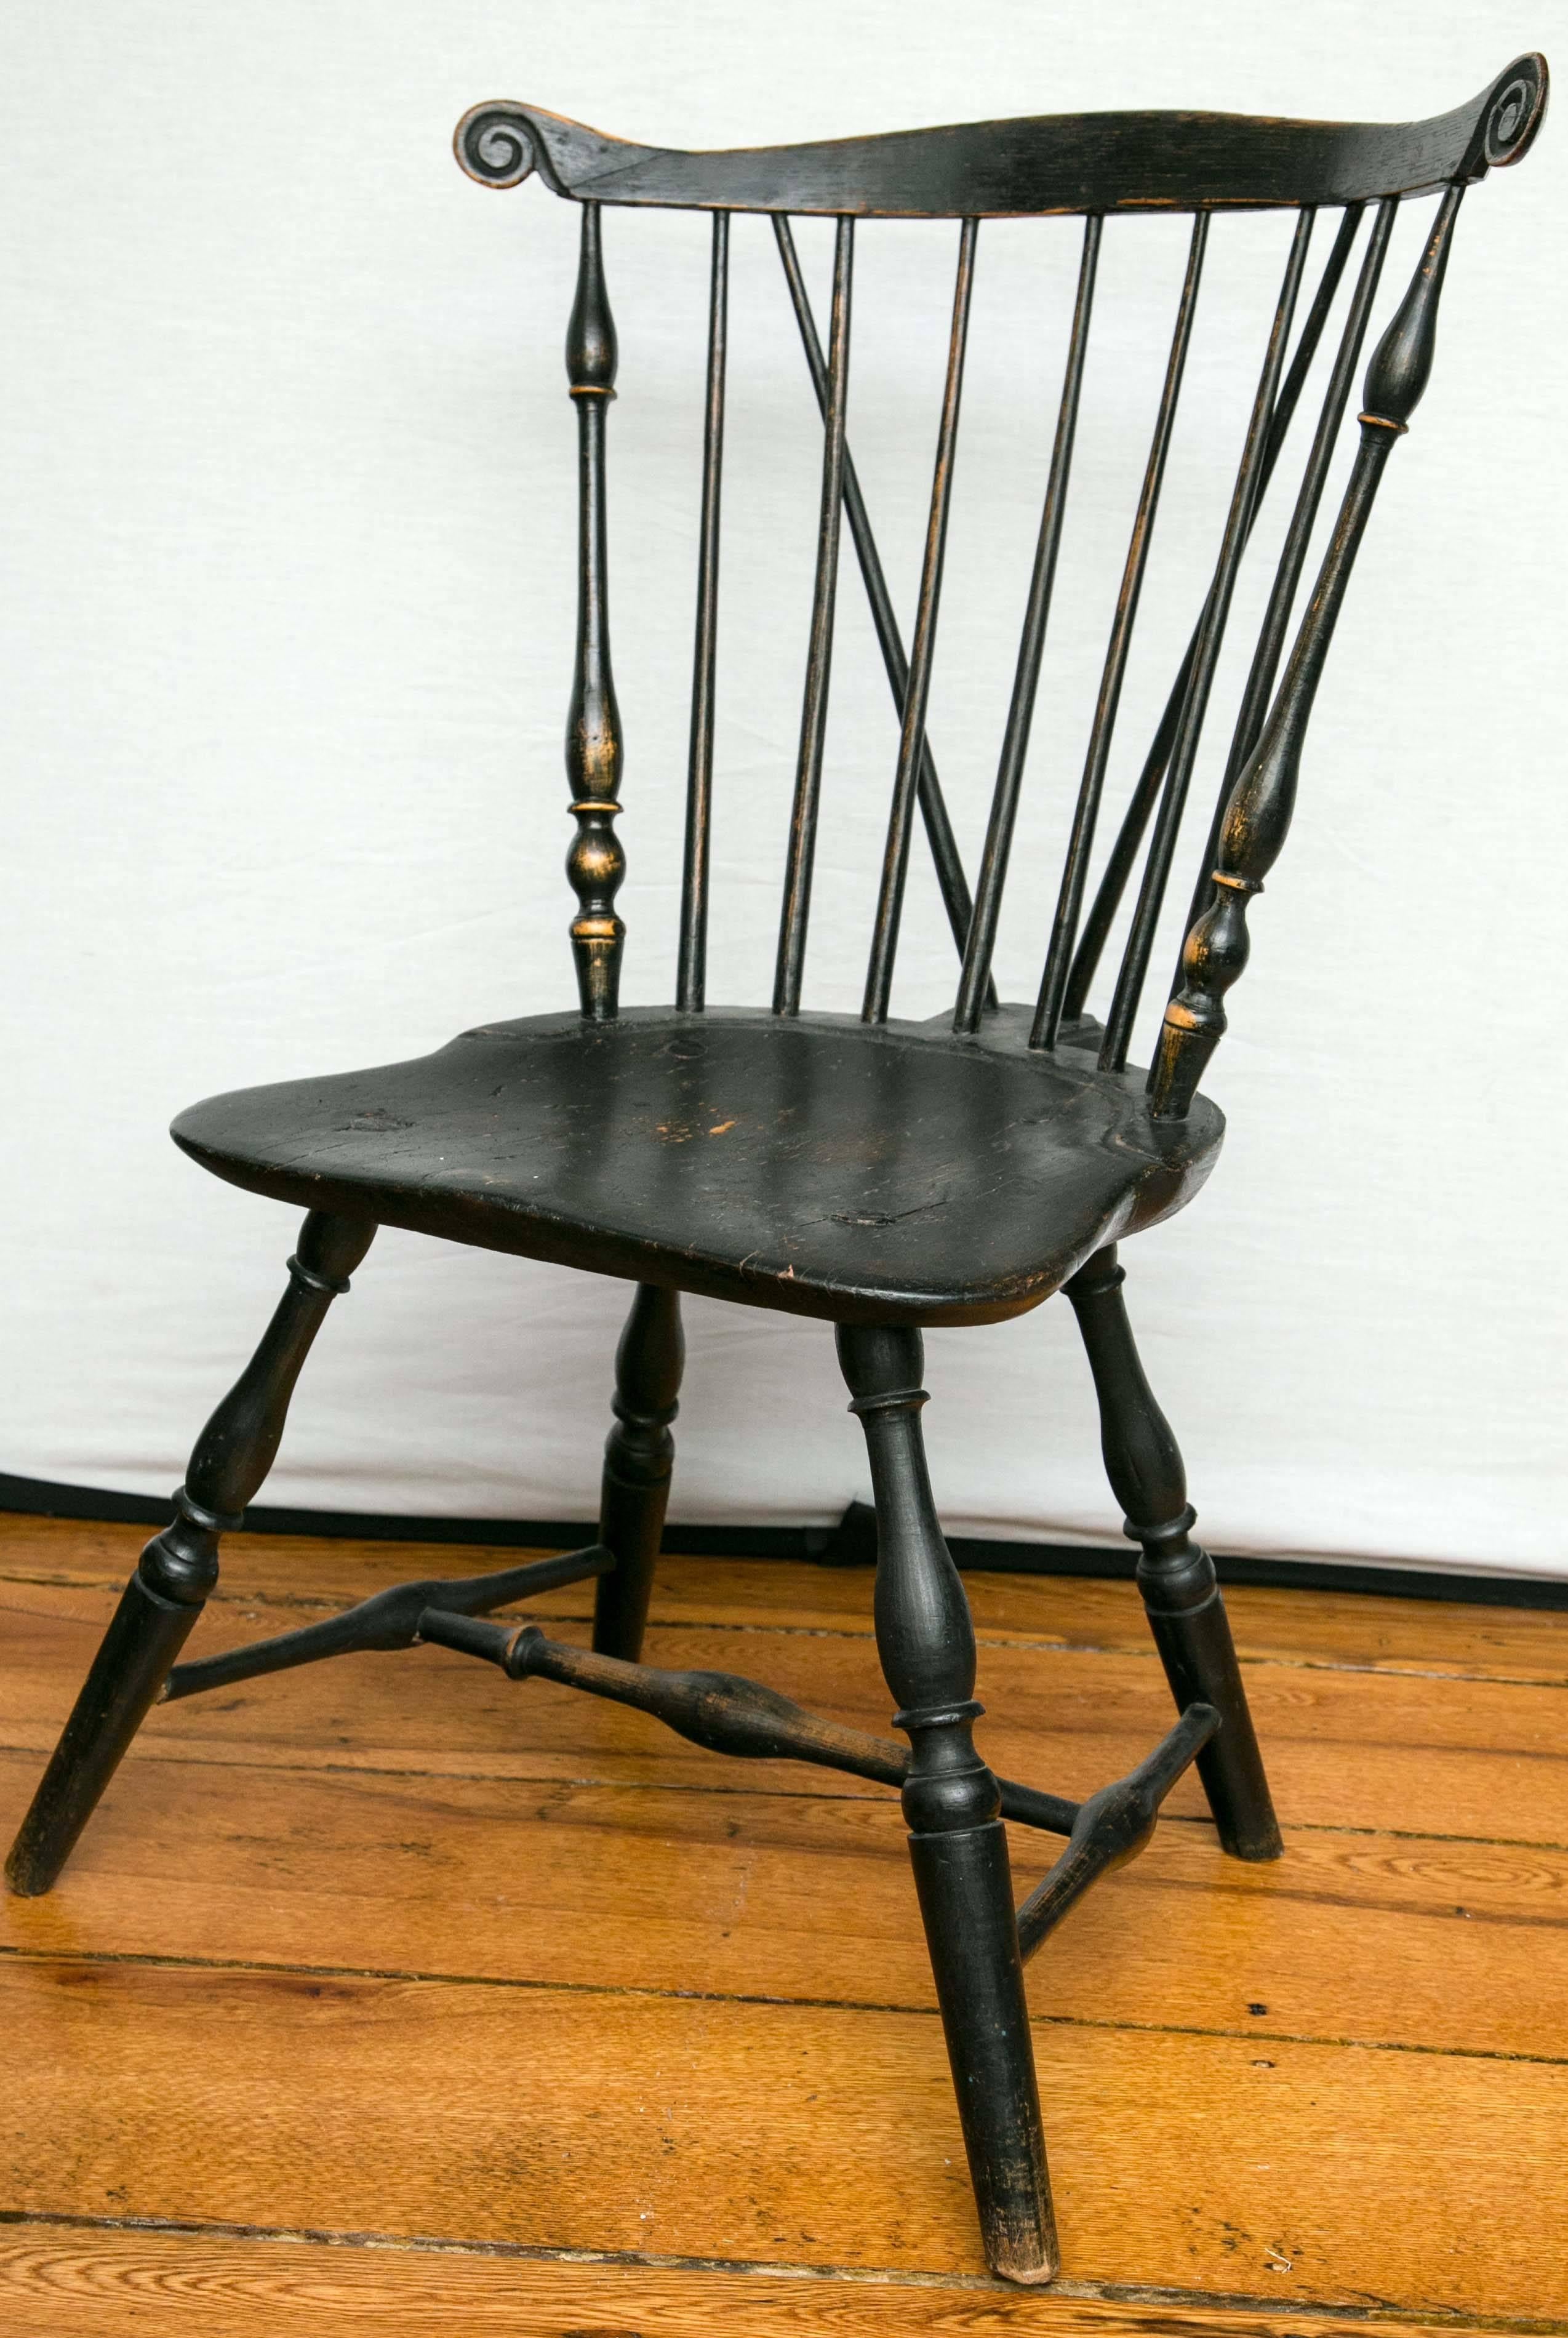 Fan-back brace-back windsor side chair having serpentine crest rail with carved ears and spindle back above a saddle seat on vase-turned legs joined by a recessed stretcher. Old black paint. Wonderful shape and proportions. 

Pennsylvania, circa